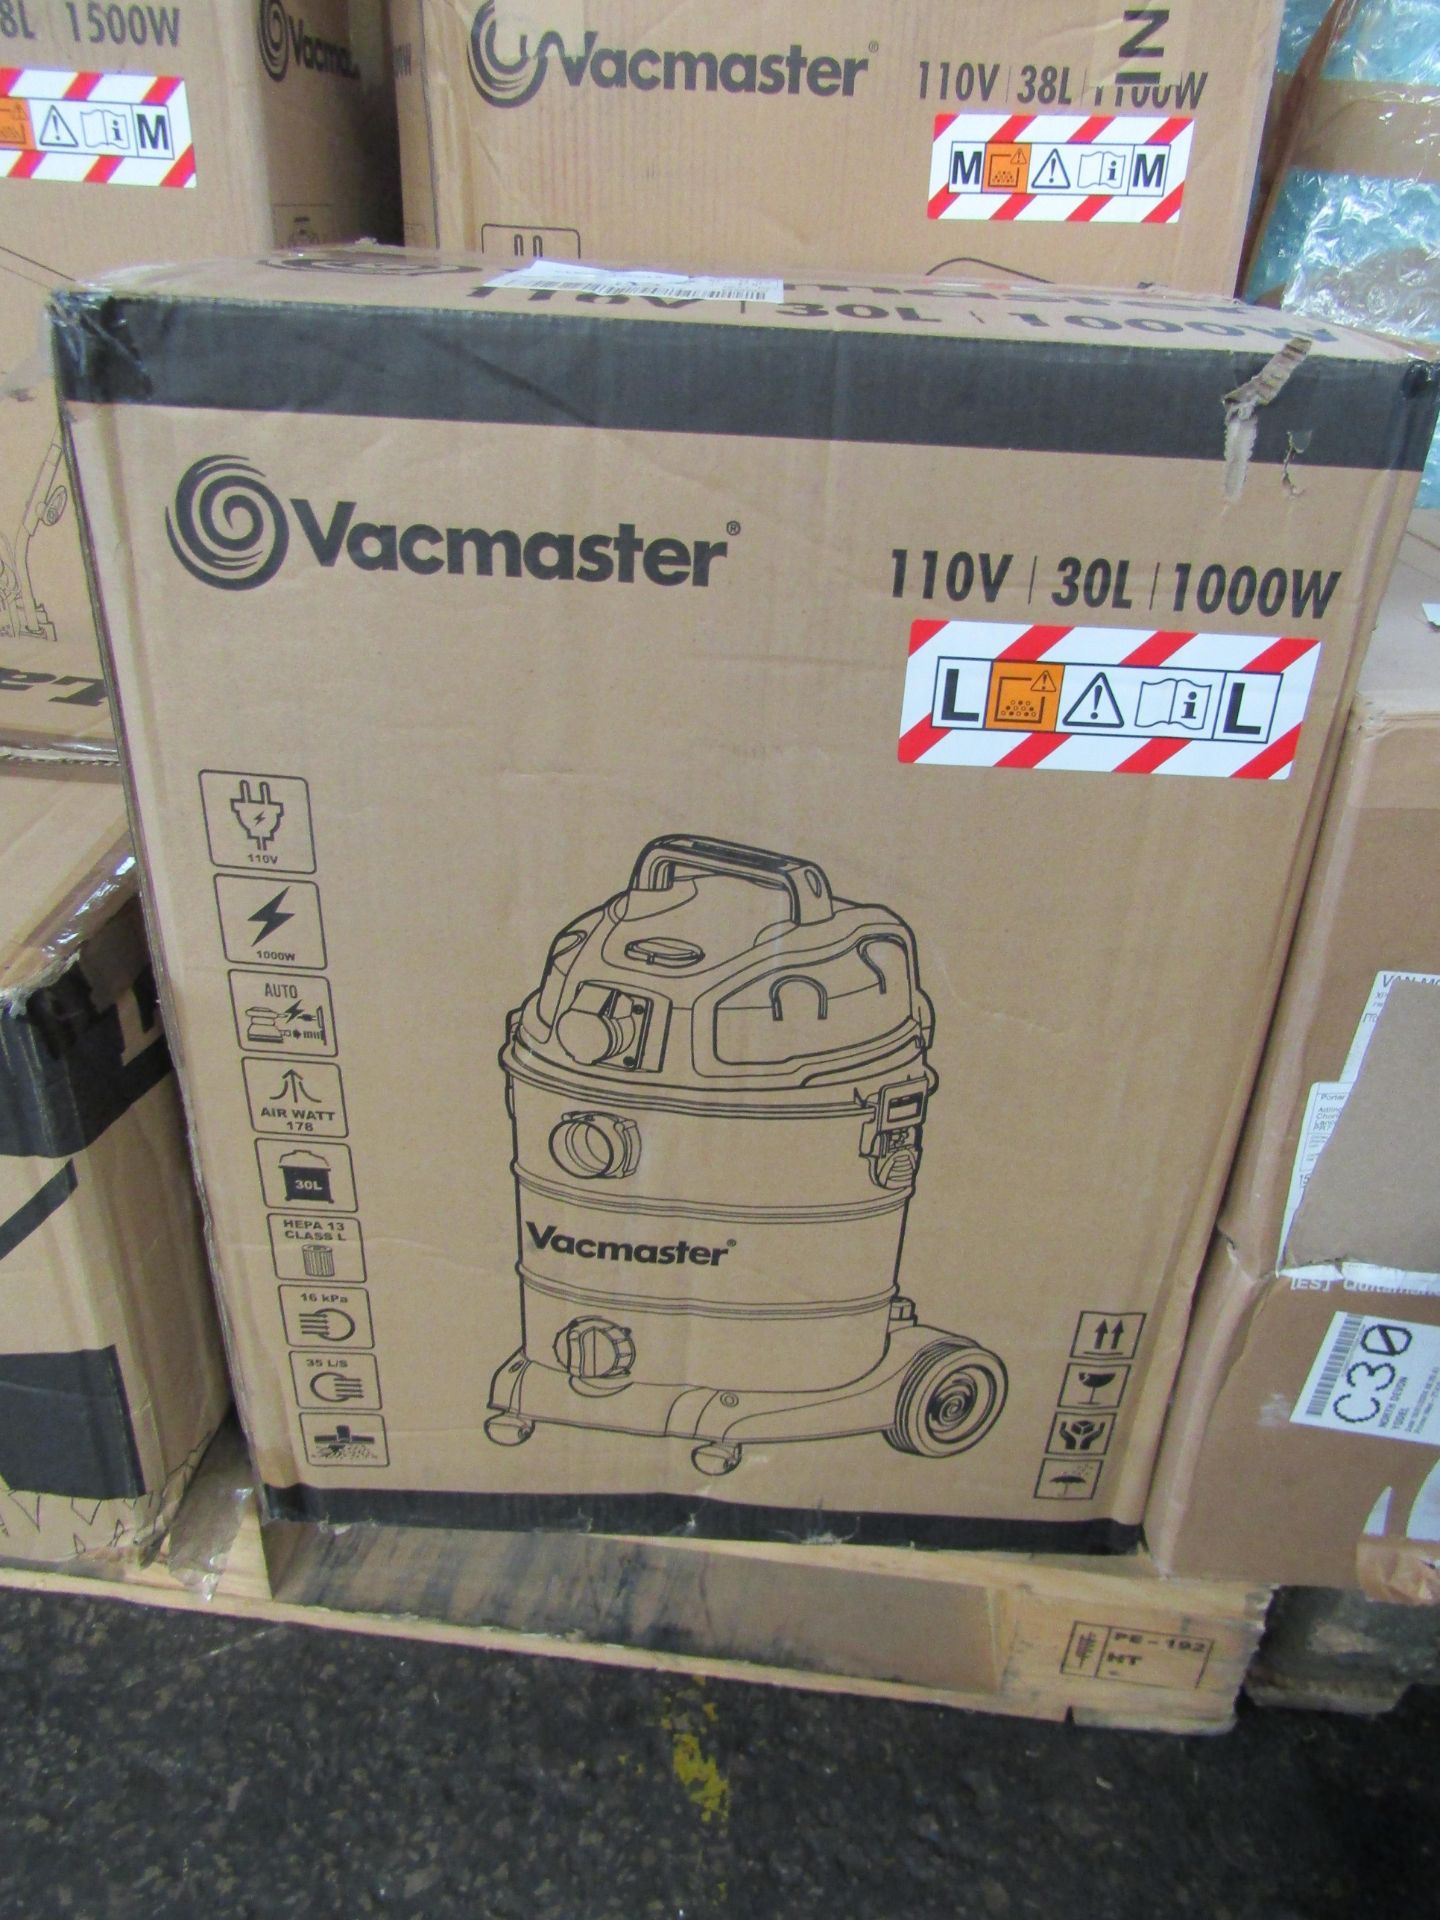 Vacmaster WD L30 110V L Class Dust Extractor RRP 130 About the Product(s) 110V, 30 litre L Class - Image 2 of 2